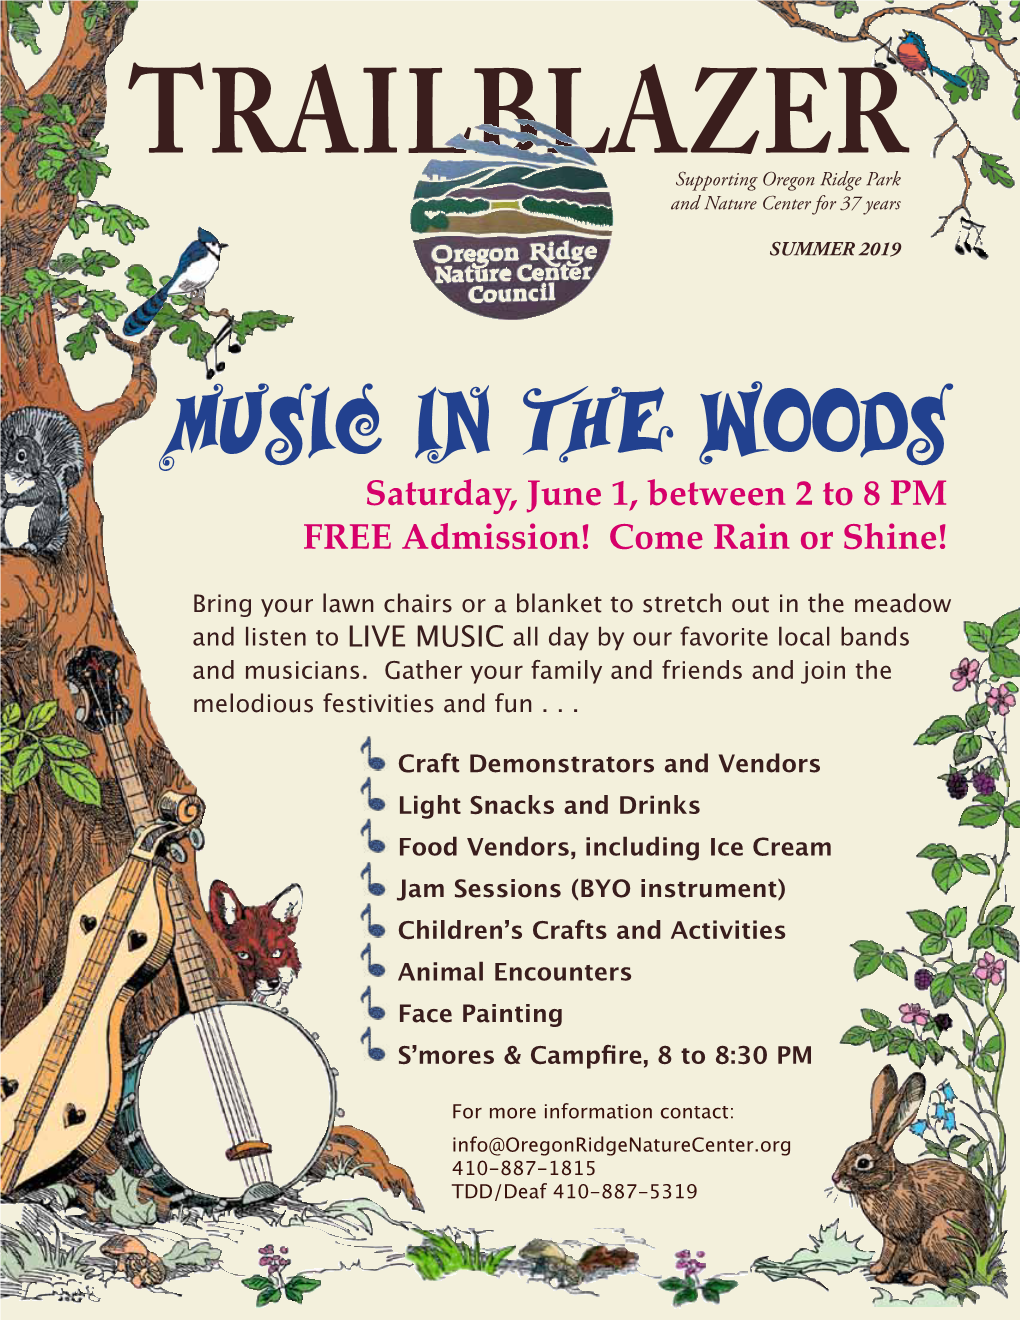 Music in the Woods Saturday, June 1, Between 2 to 8 PM FREE Admission! Come Rain Or Shine!